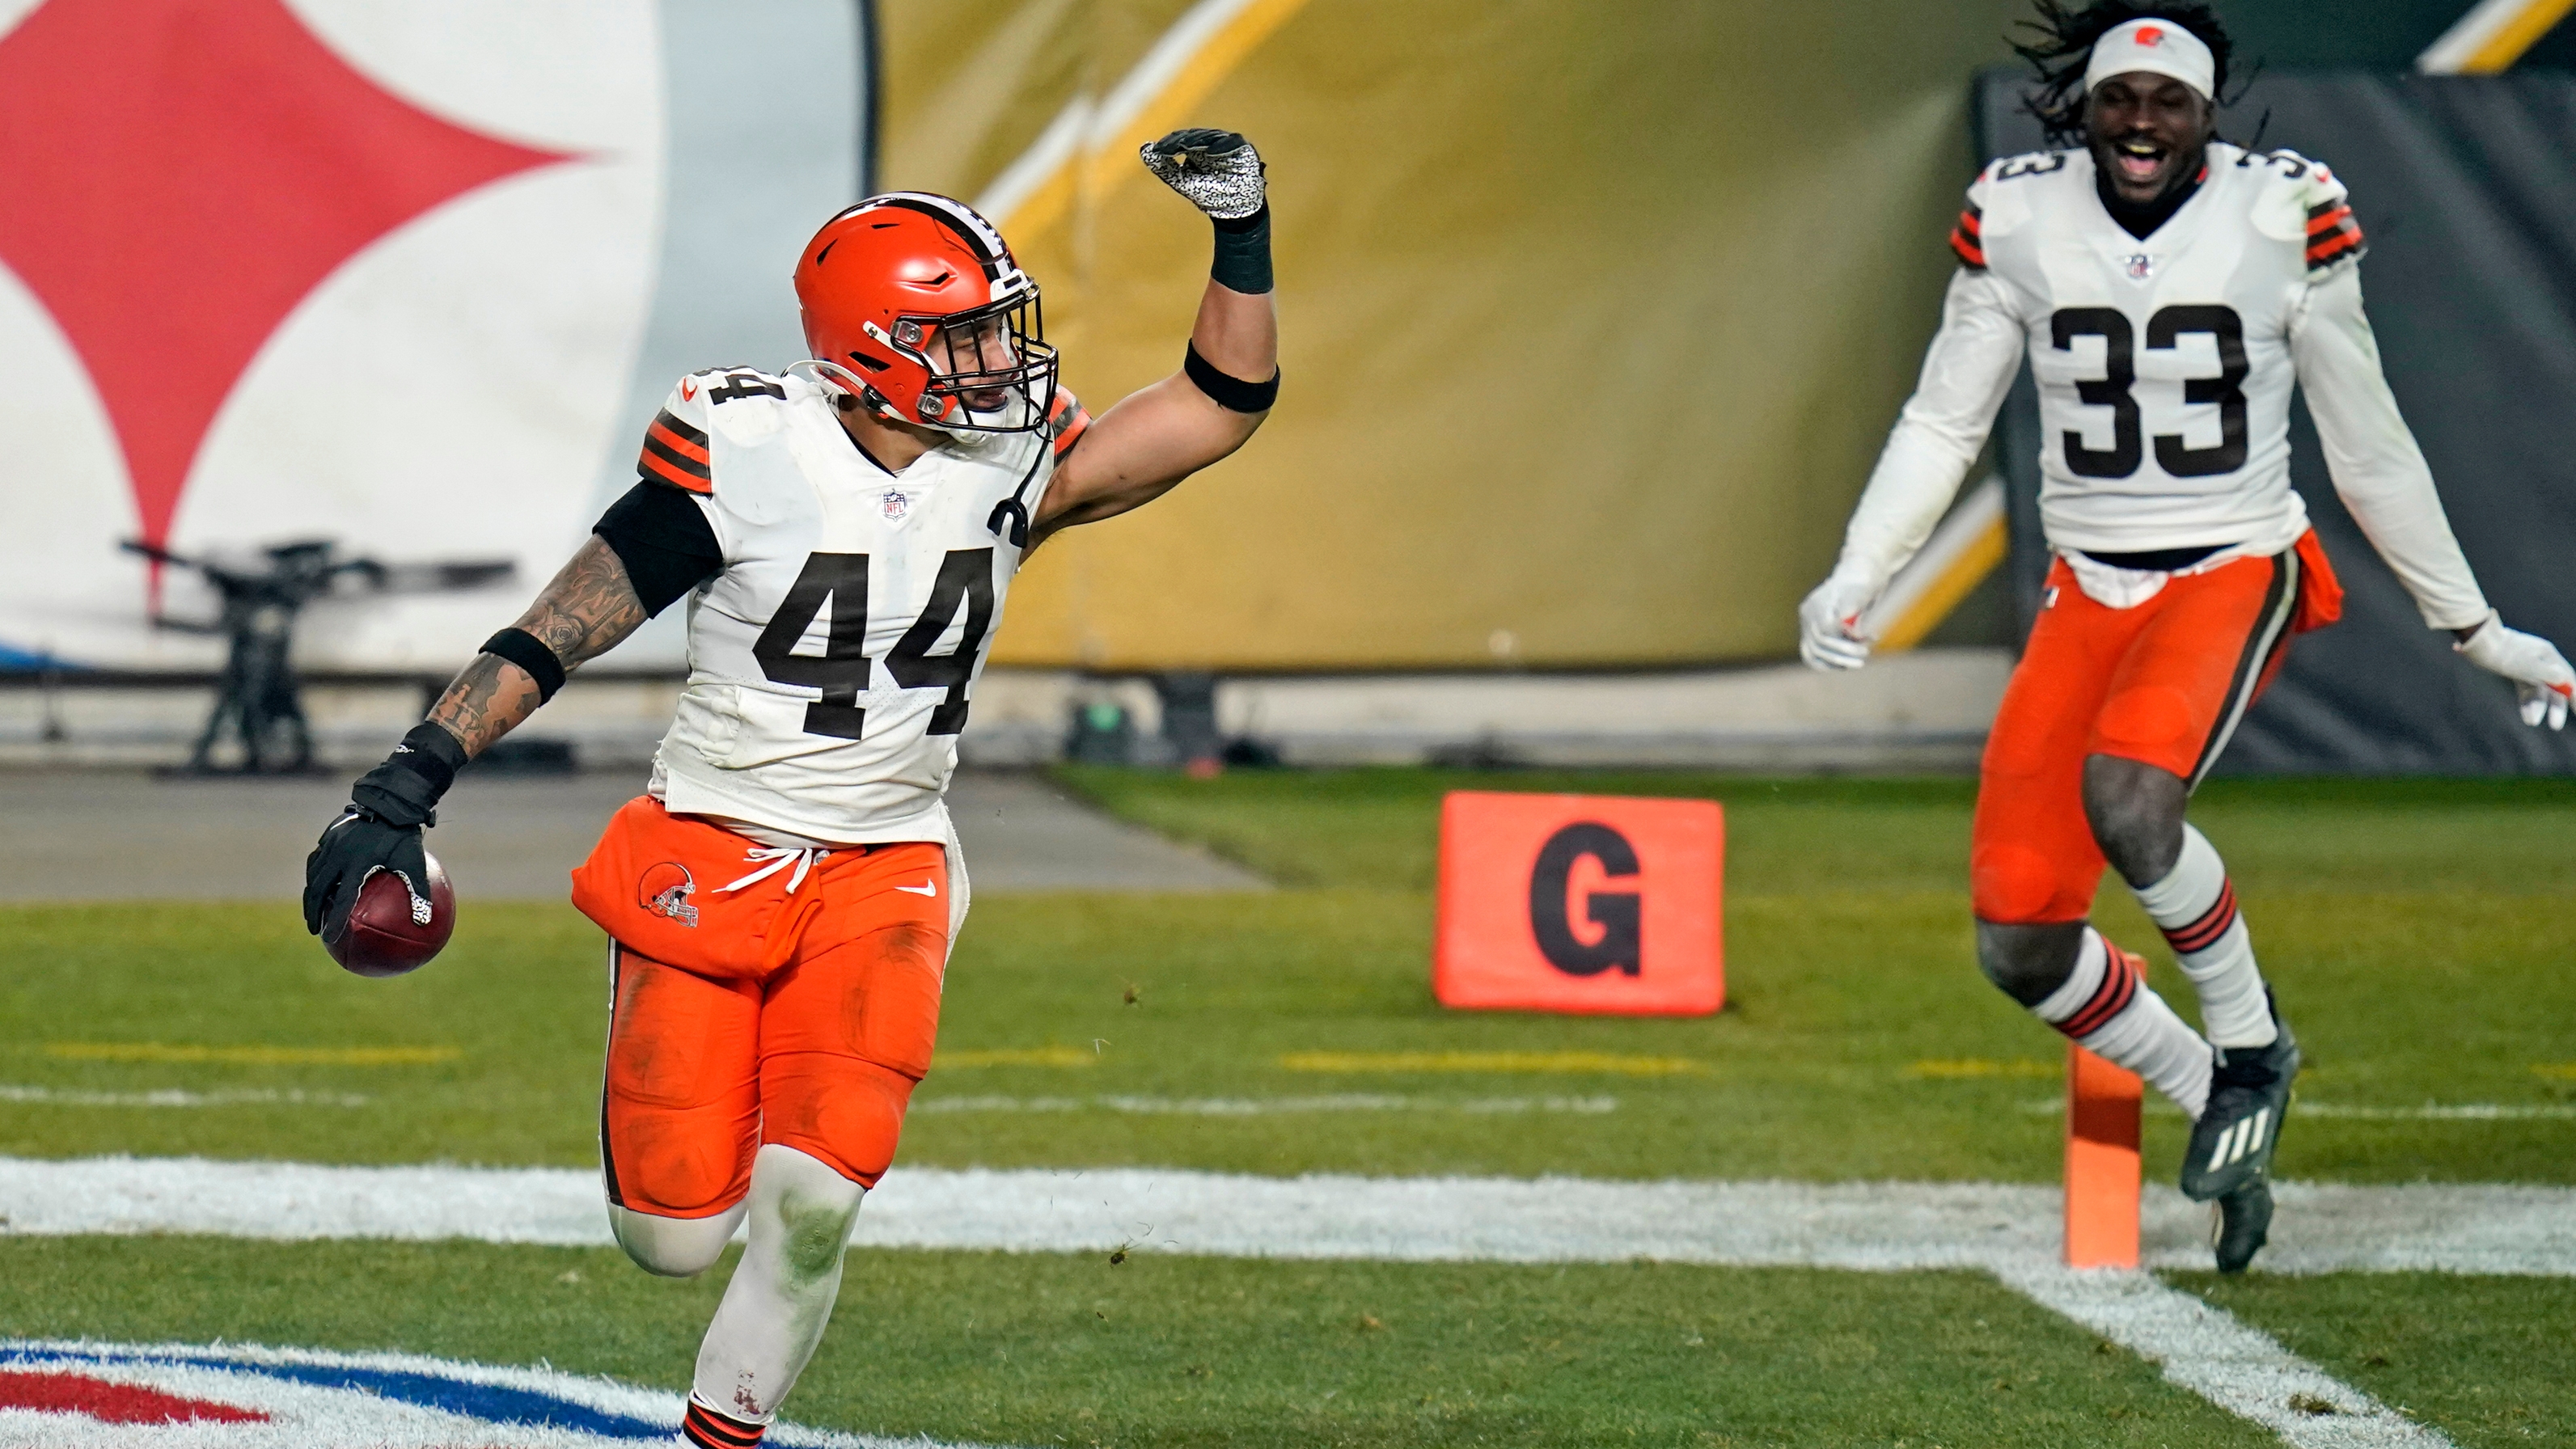 Browns stun Steelers early, hold on for 48-37 playoff victory